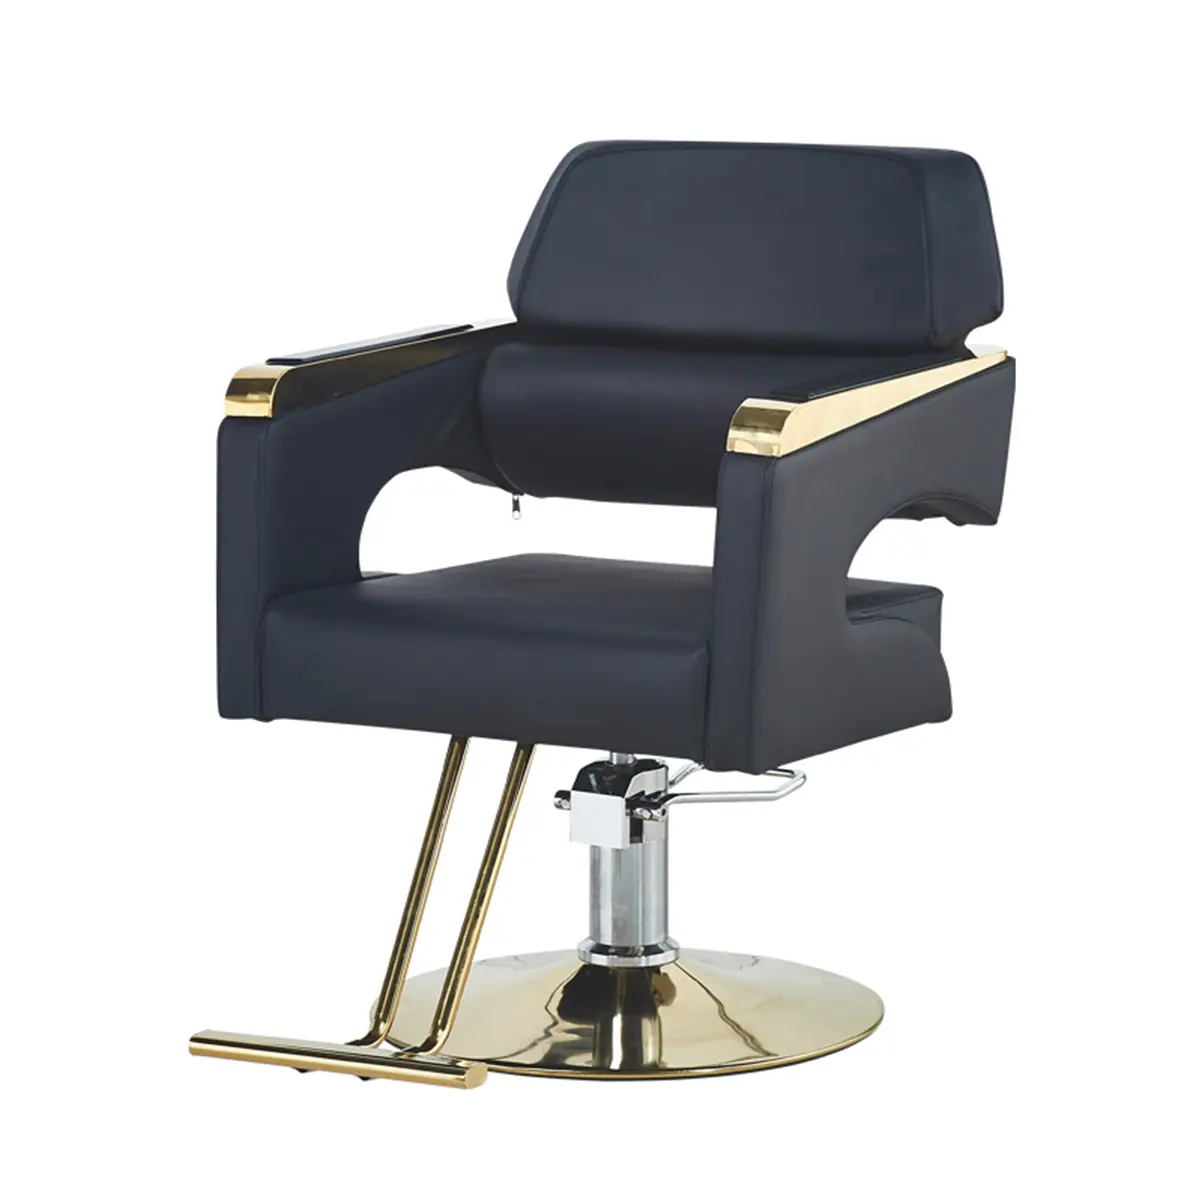 Hot sale adjustable high seat barber chair salon beauty hair salon for chair barber chair hair salon